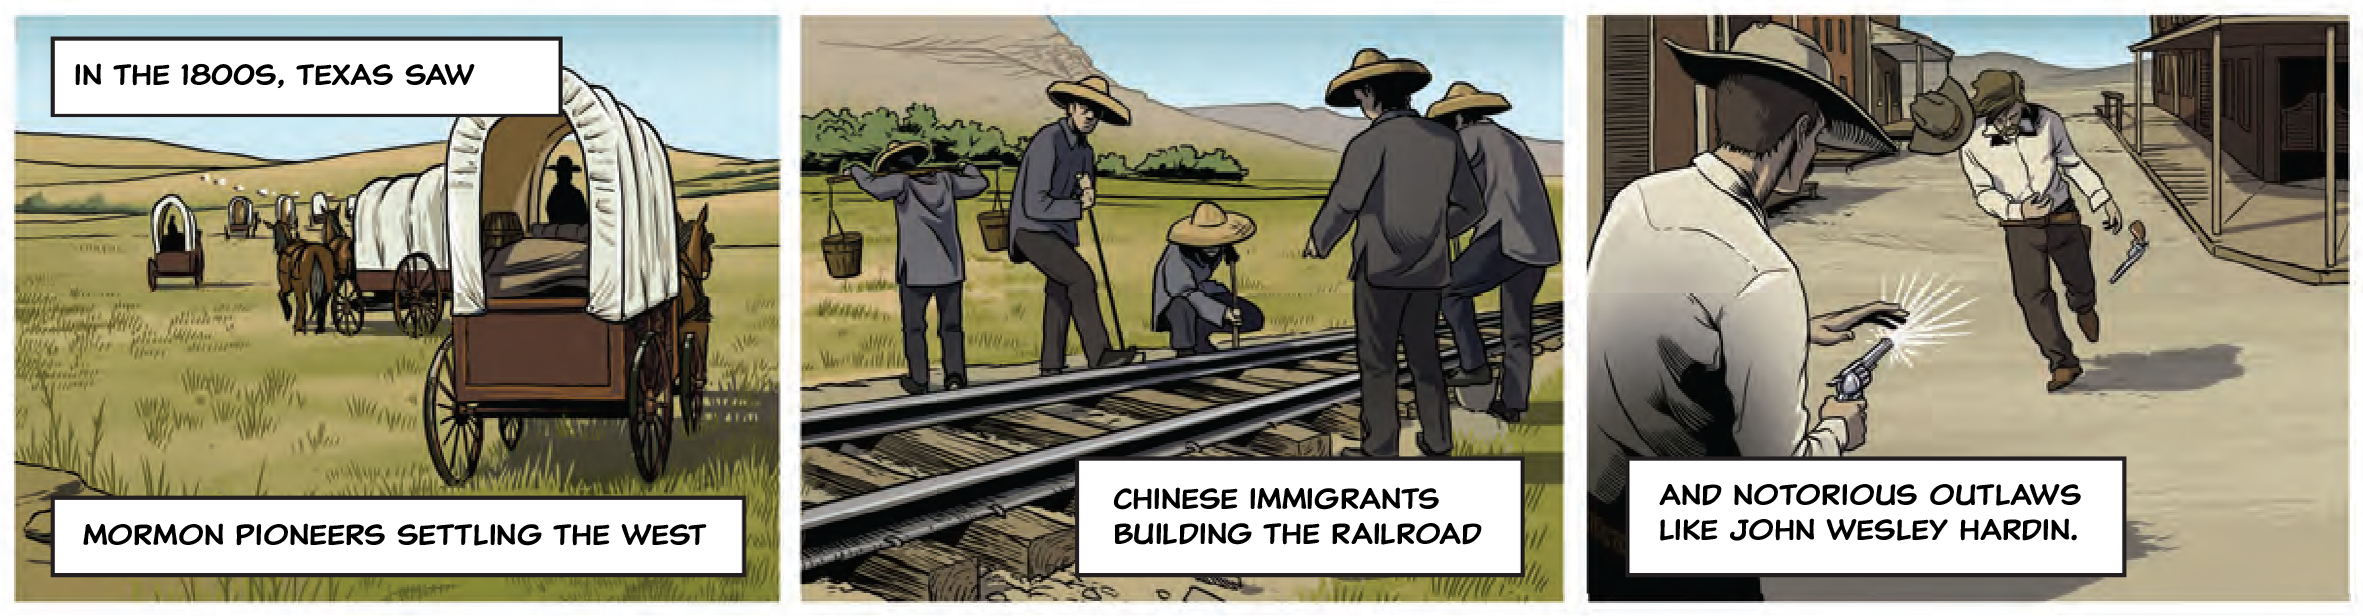 Three panels show: A wagon train crosses the plains. Chinese railroad workers align steel rails across wooden ties as another worker carries water. A pair of gungfighters are on a deserted street, one fires, the other clutches his stomach, drops pistol.